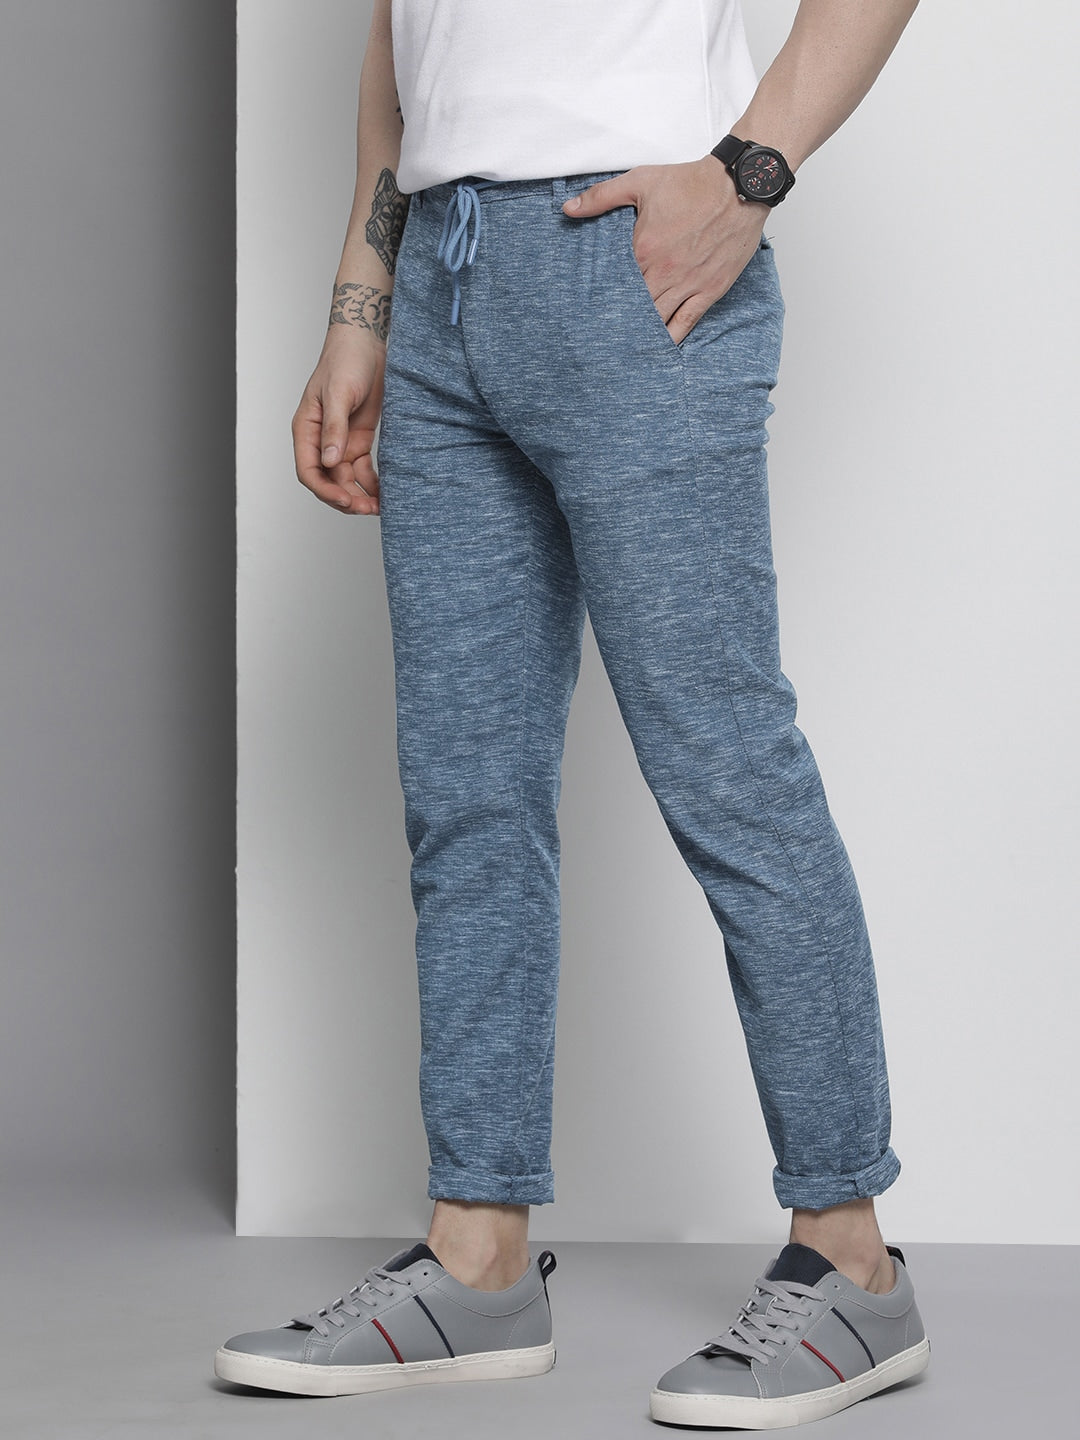 Solid Men Blue Track Pants Price in India - Buy Solid Men Blue Track Pants  online at Shopsy.in